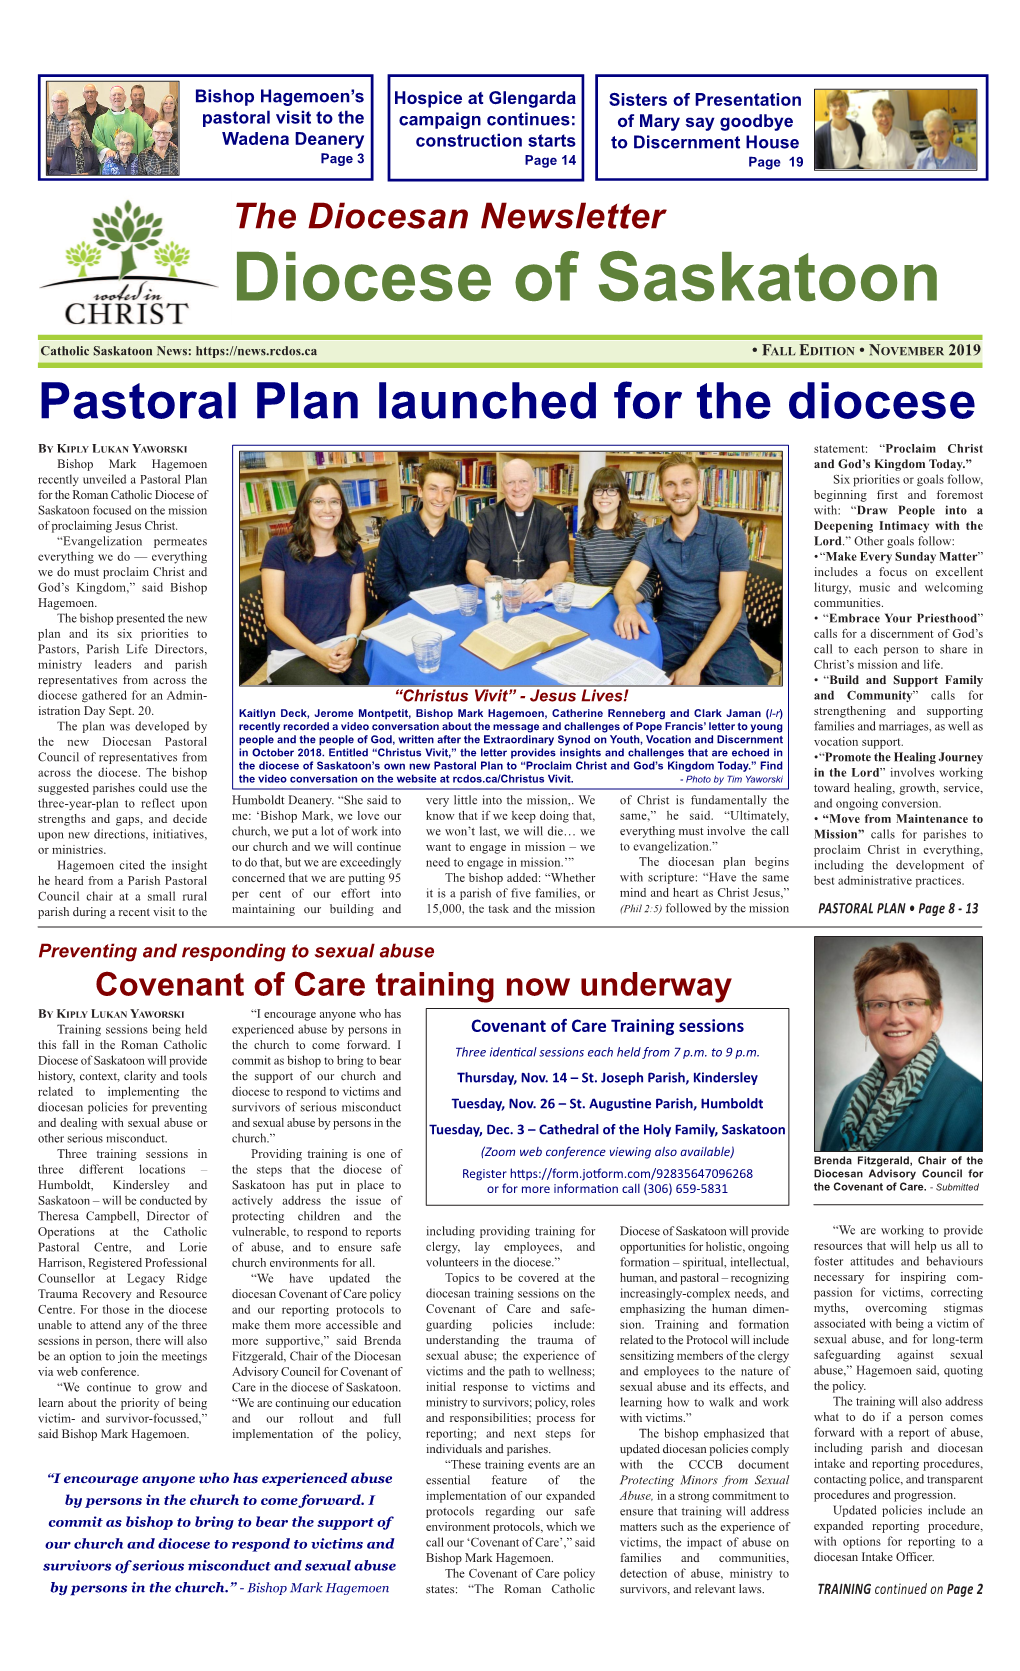 2019 – Fall Edition of the Diocesan Newsletter